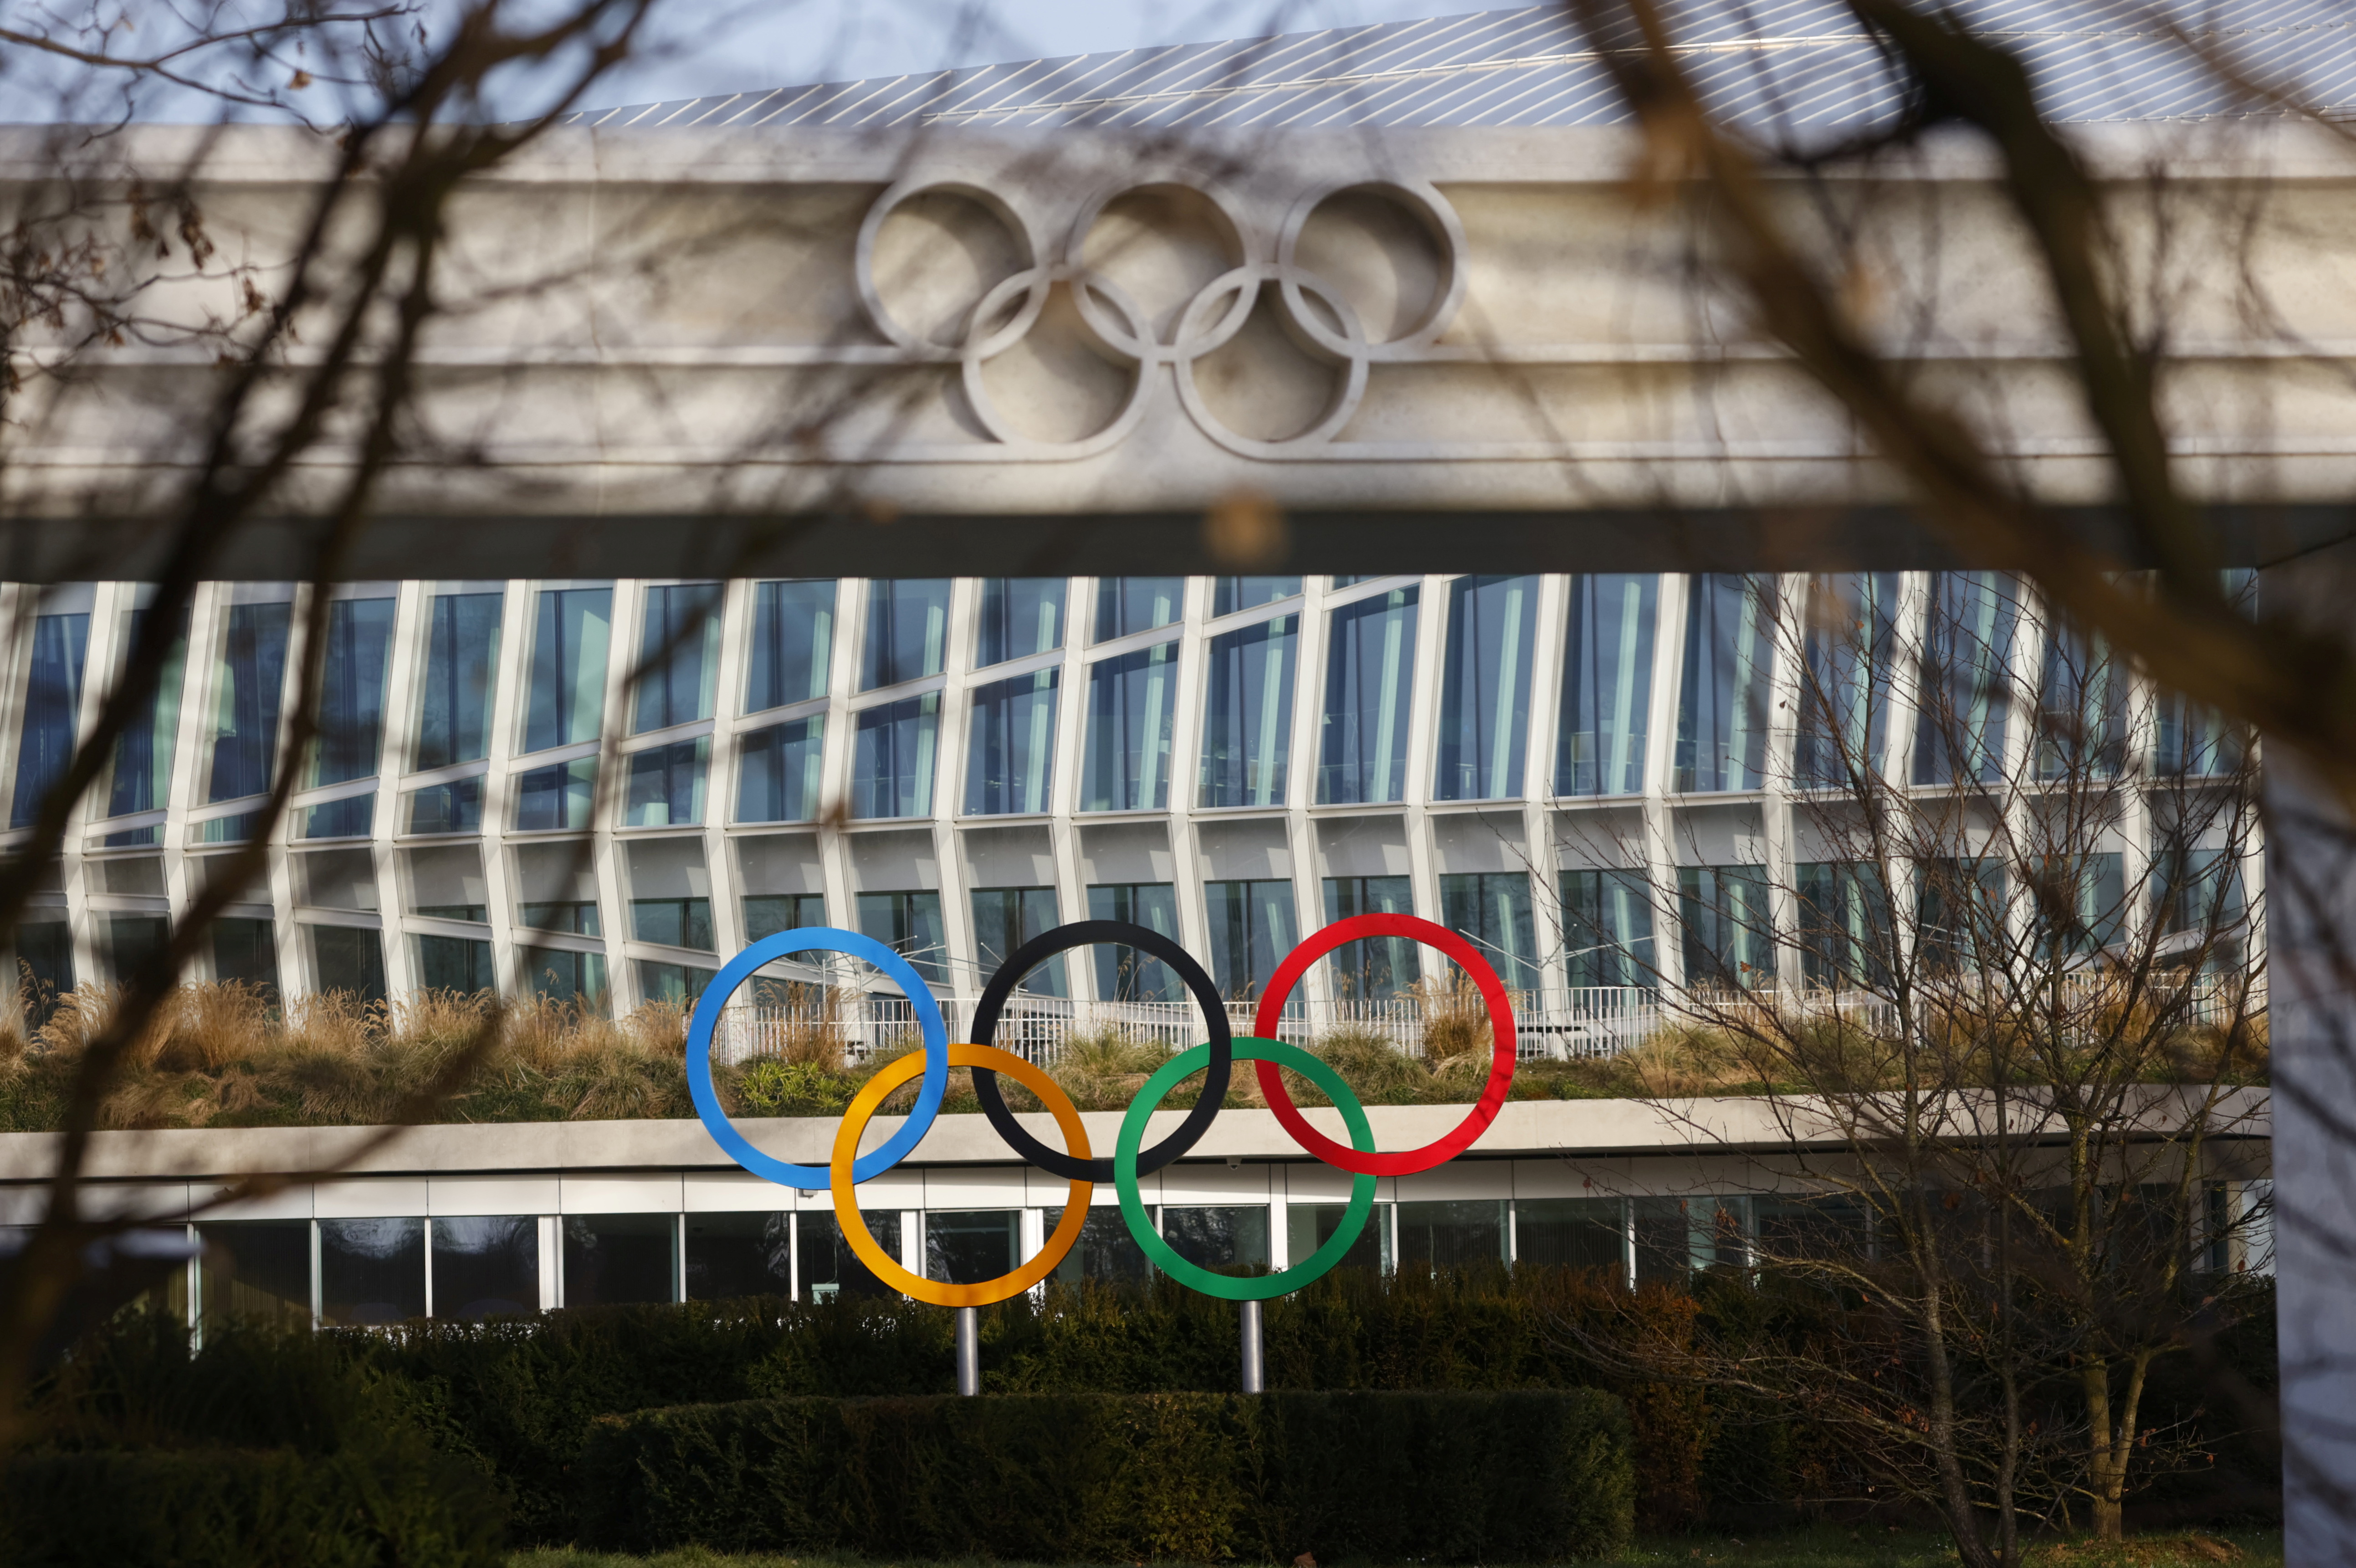 The Olympic rings are pictured in front of the International Olympic Committee (IOC) headquarters during the coronavirus disease (COVID-19) outbreak in Lausanne, Switzerland, February 24, 2021. REUTERS/Denis?Balibouse